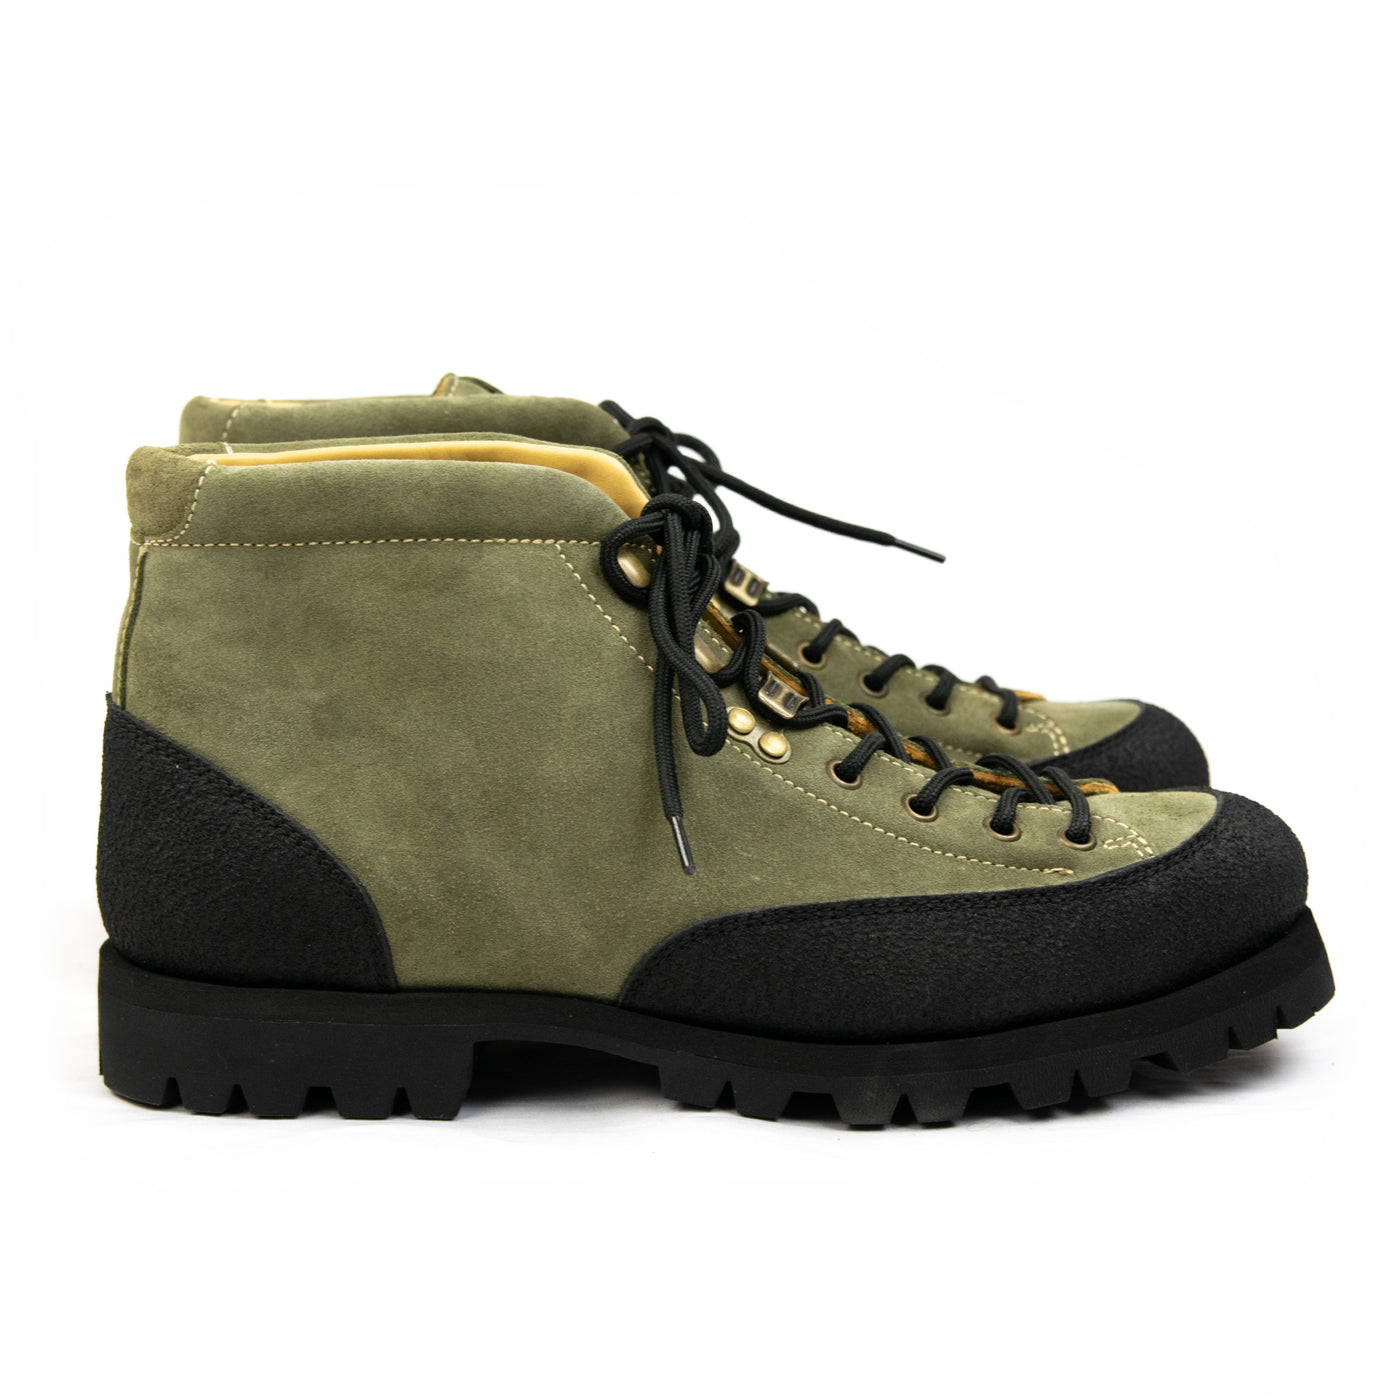 Paraboot Yosemite / Jannu Int 8 Boot Noire Vel Olive Side